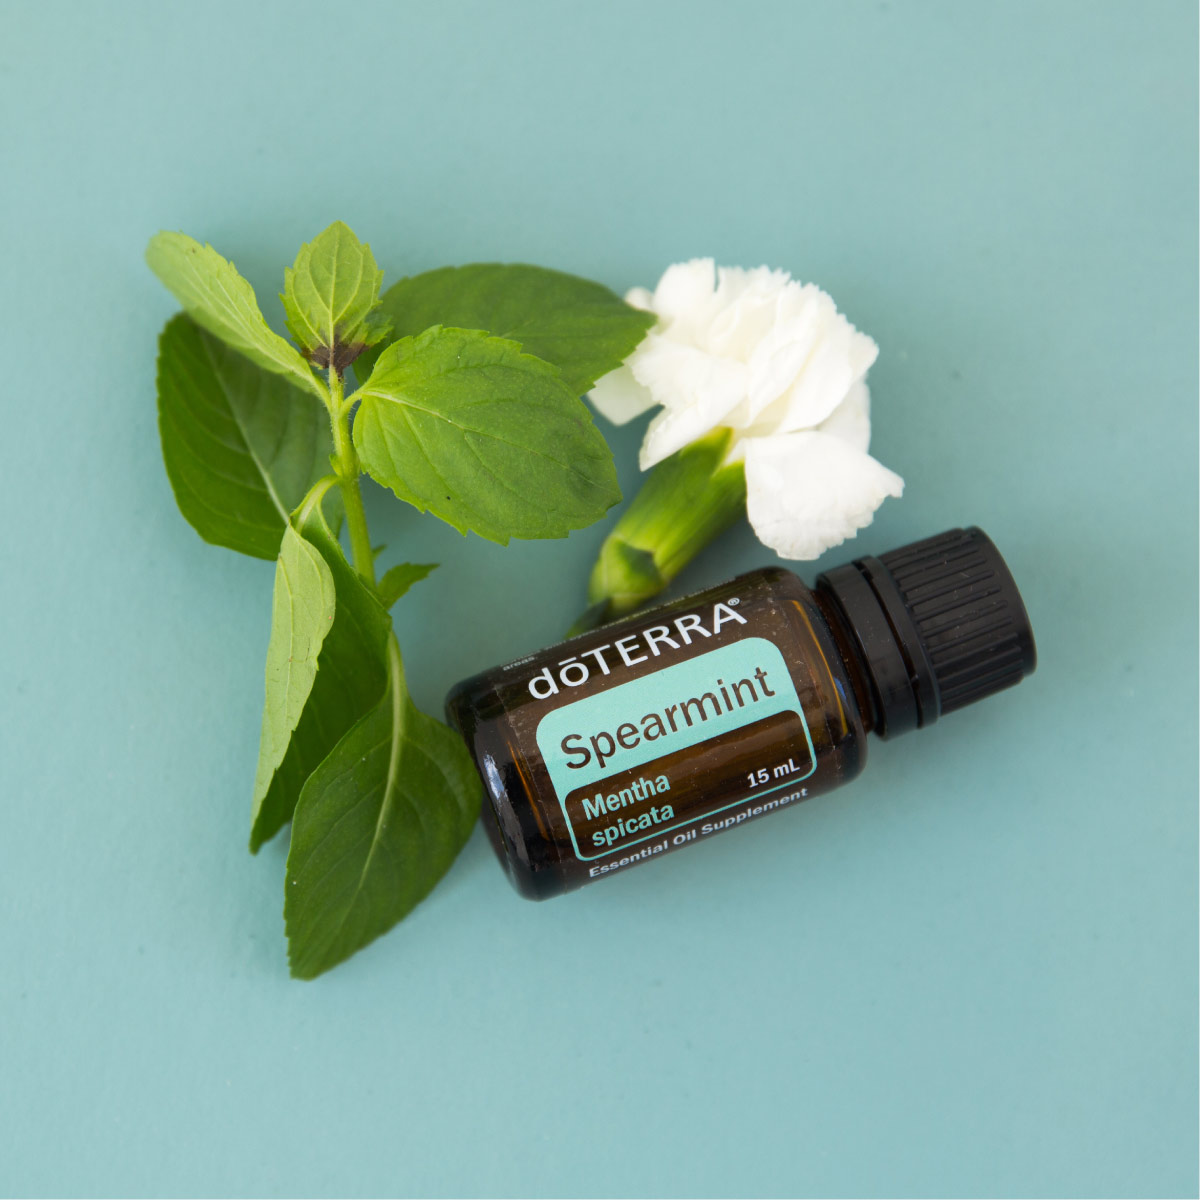 Bottle of doTERRA Spearmint essential oil next to fresh spearmint leaves and a small white flower. Where do I apply Spearmint essential oil? Spearmint oil can be used internally, topically, and aromatically when applied in the appropriate amounts.